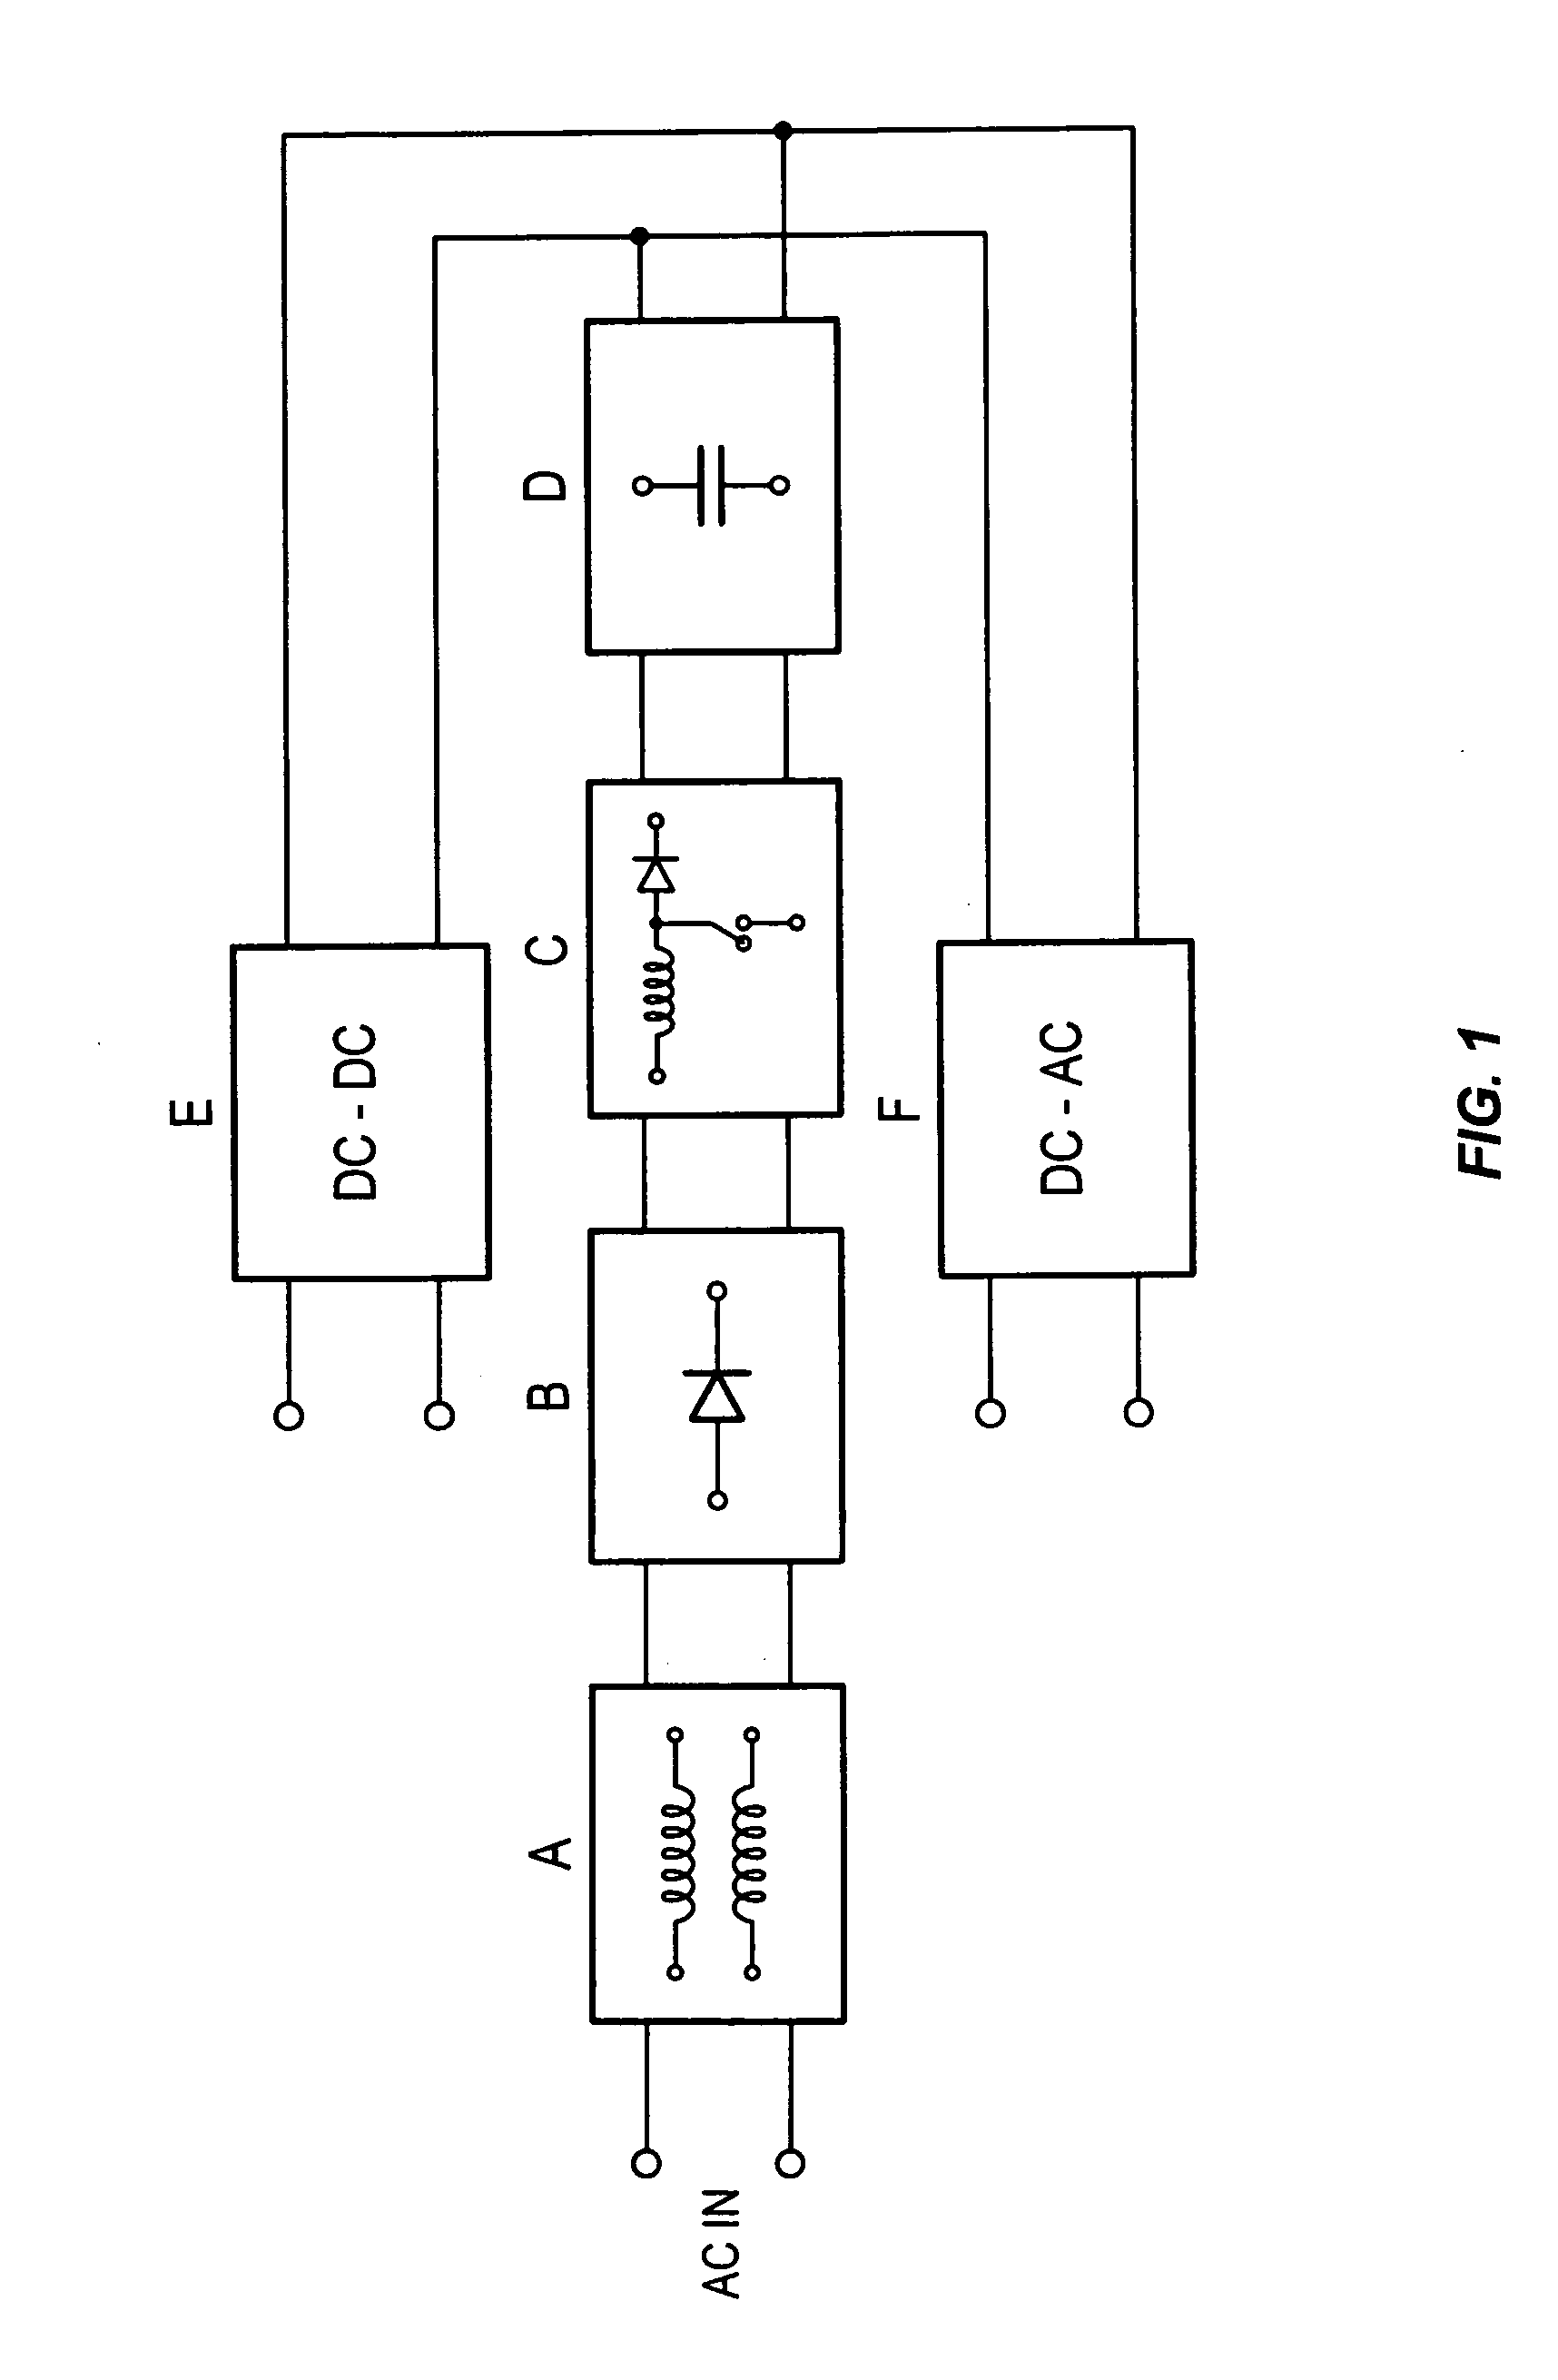 Single stage power factor corrected power converter with reduced AC inrush